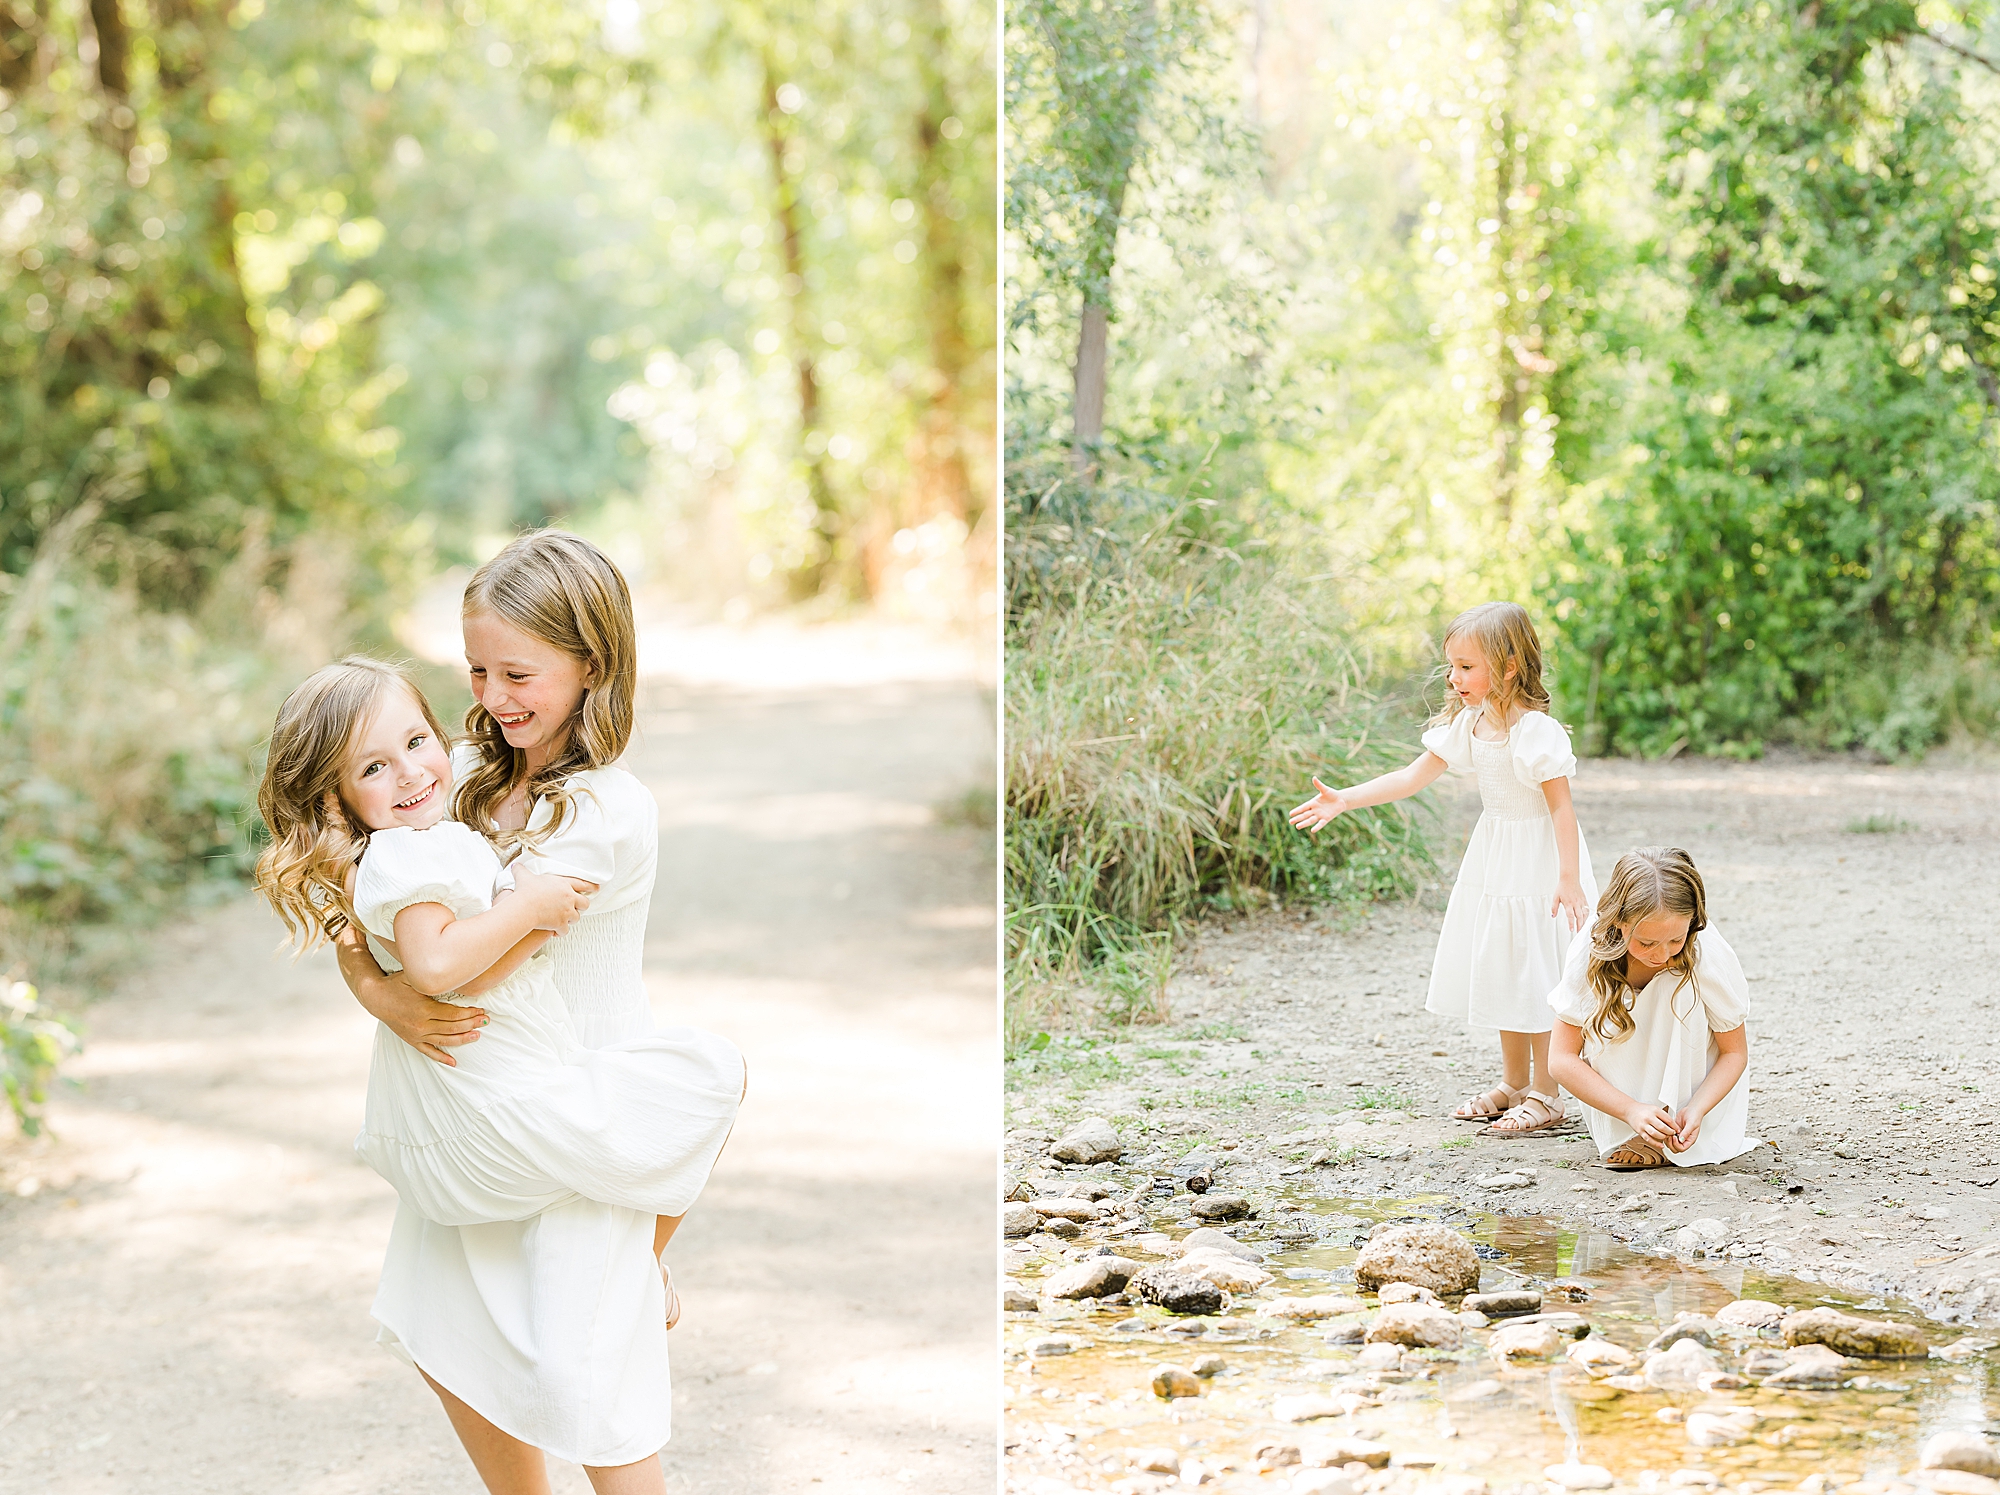 A summer family portrait session in Northern Utah